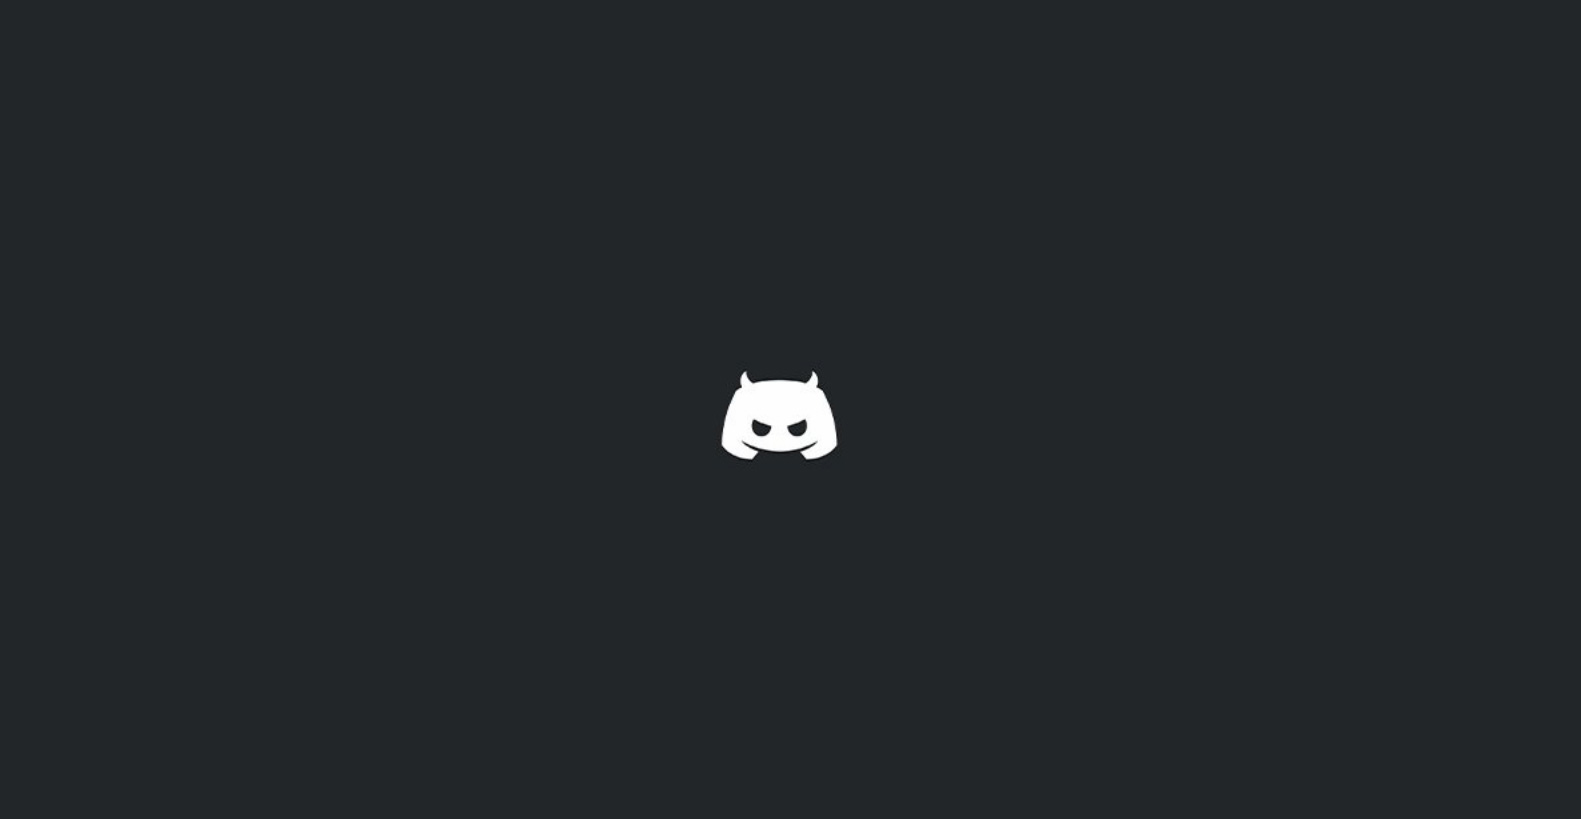 Wallpaper changed to angry Discord logo